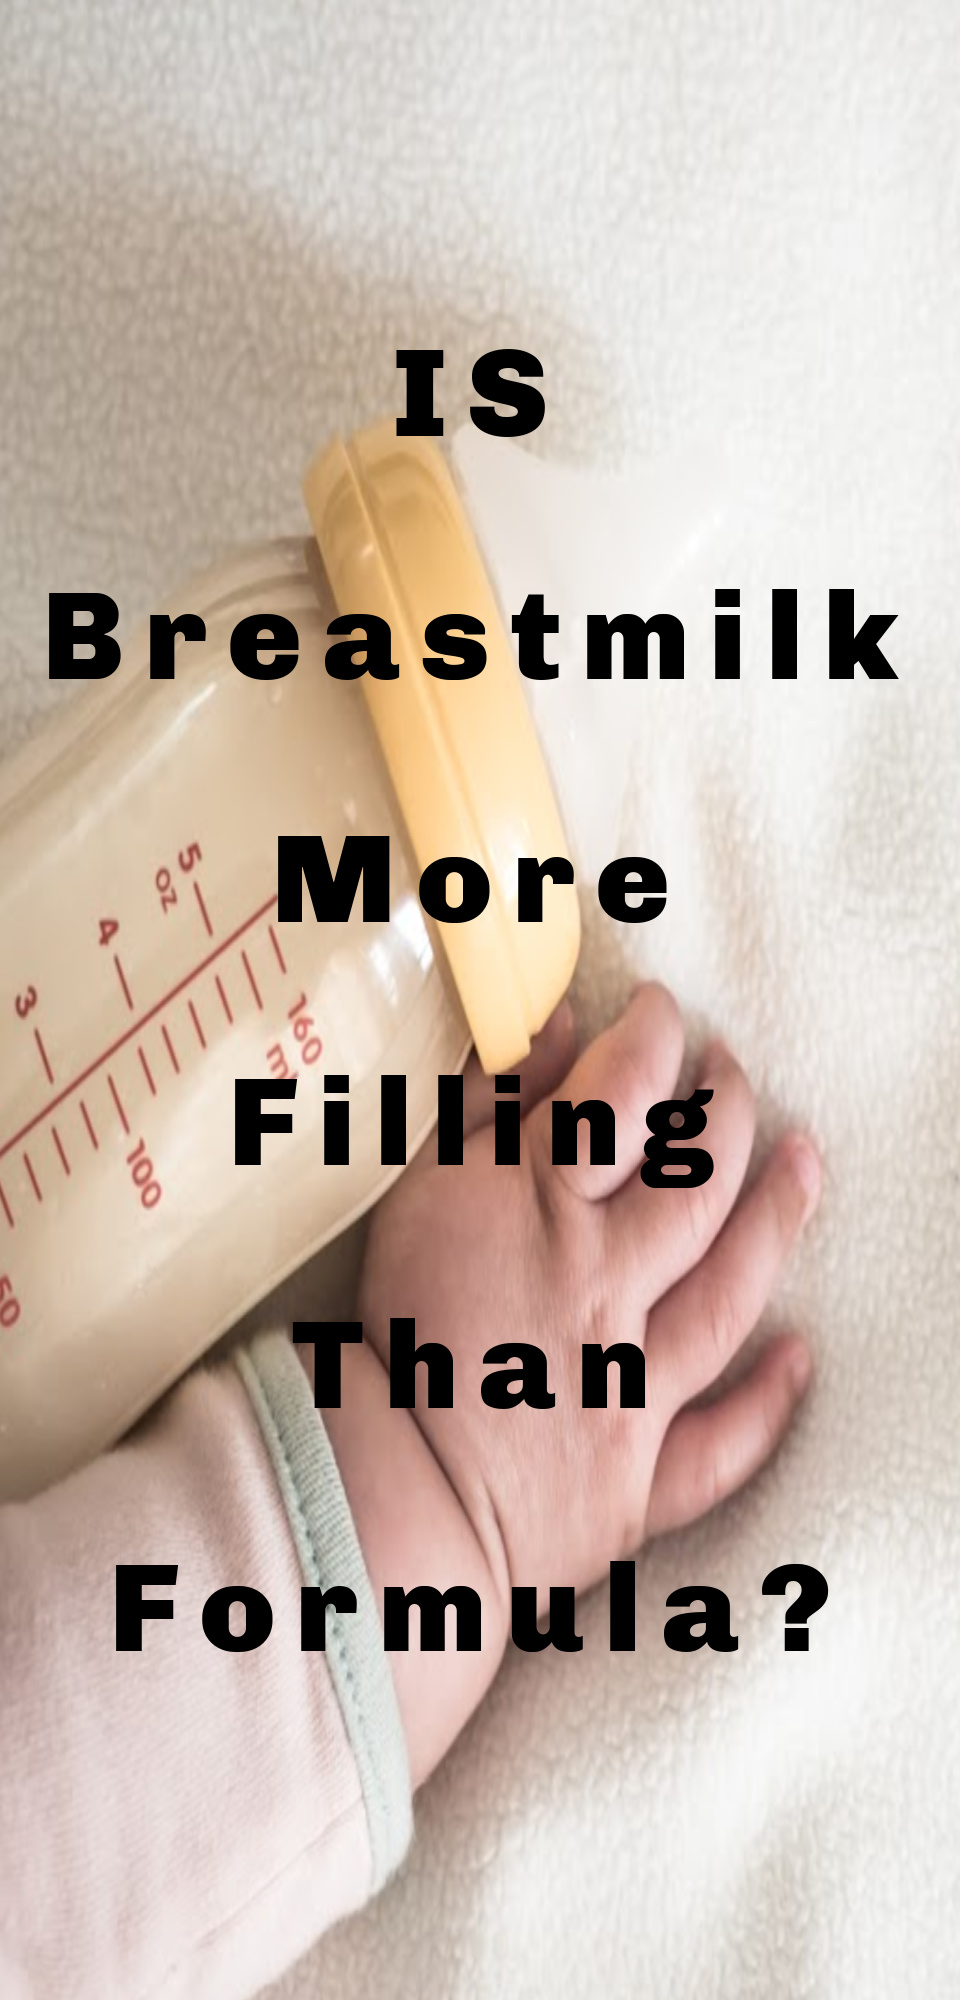 Is Breastmilk More Filling Than Formula?